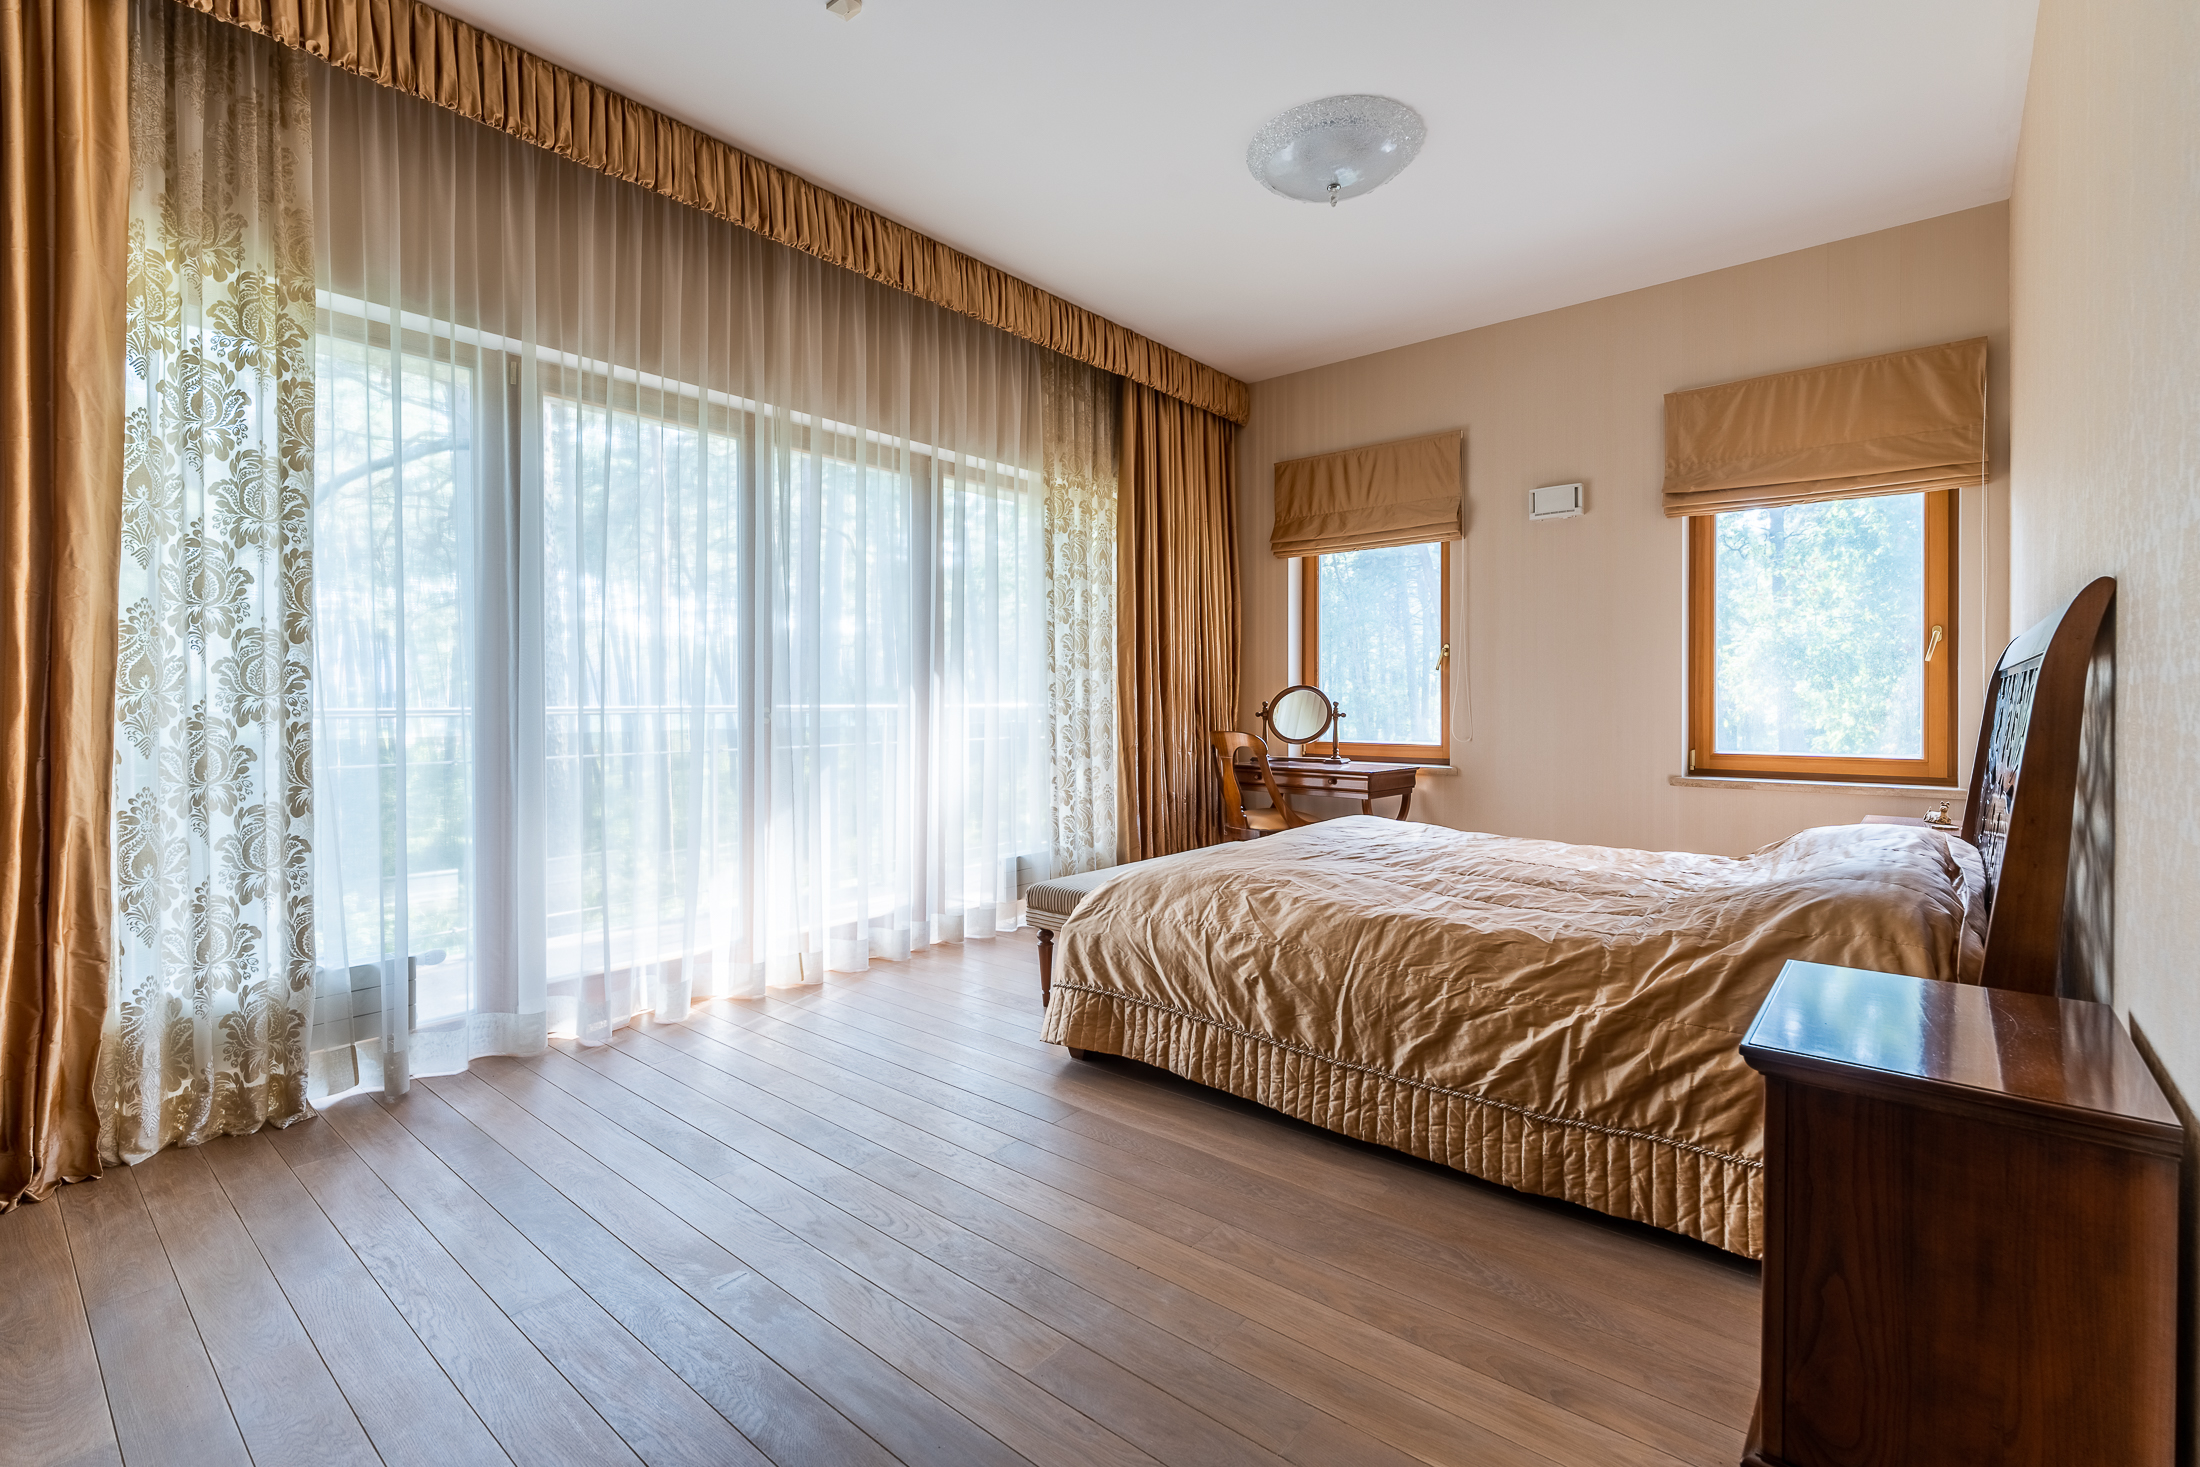 Apartment in Jurmala with a view of the pine park